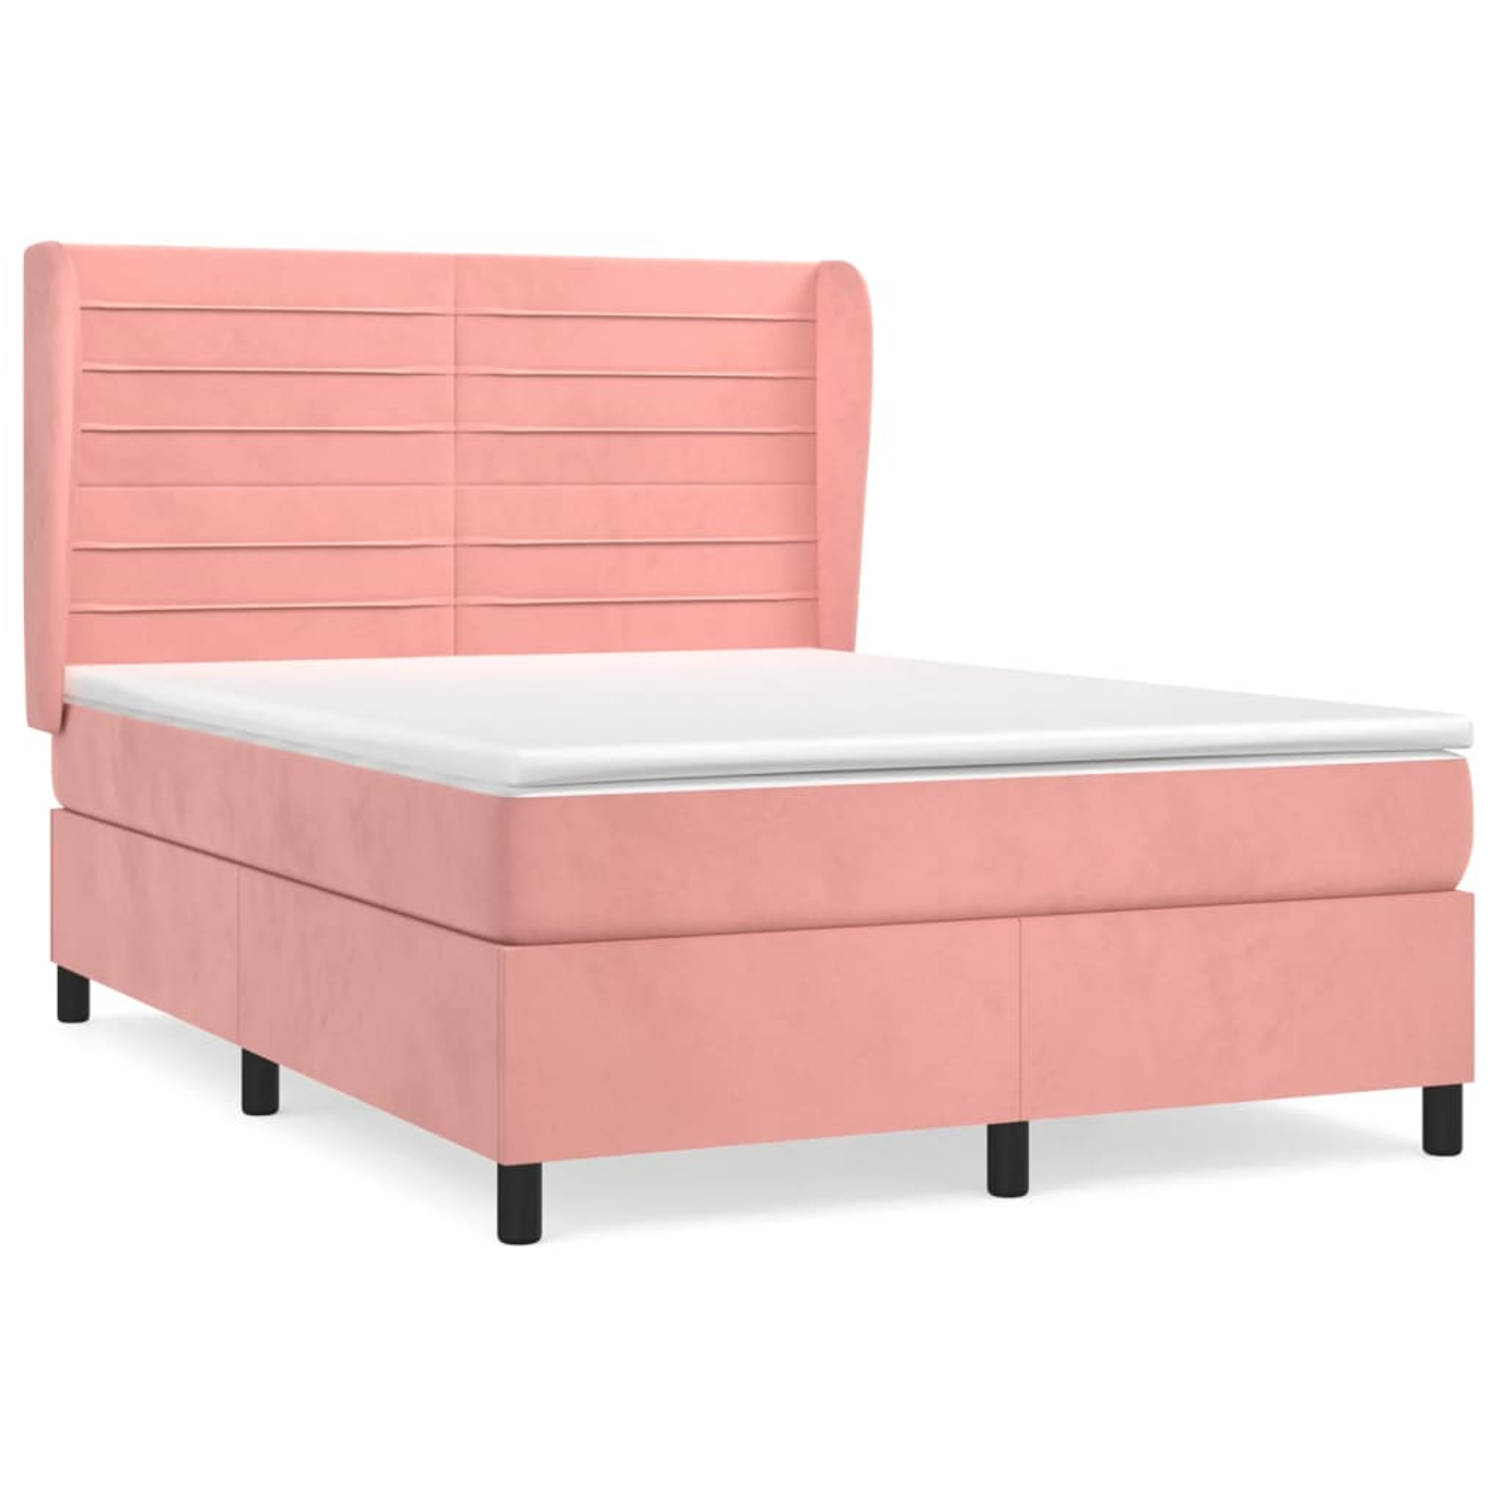 The Living Store Boxspringbed - Fluweel - Roze - 203x147x118/128 cm - Pocketvering